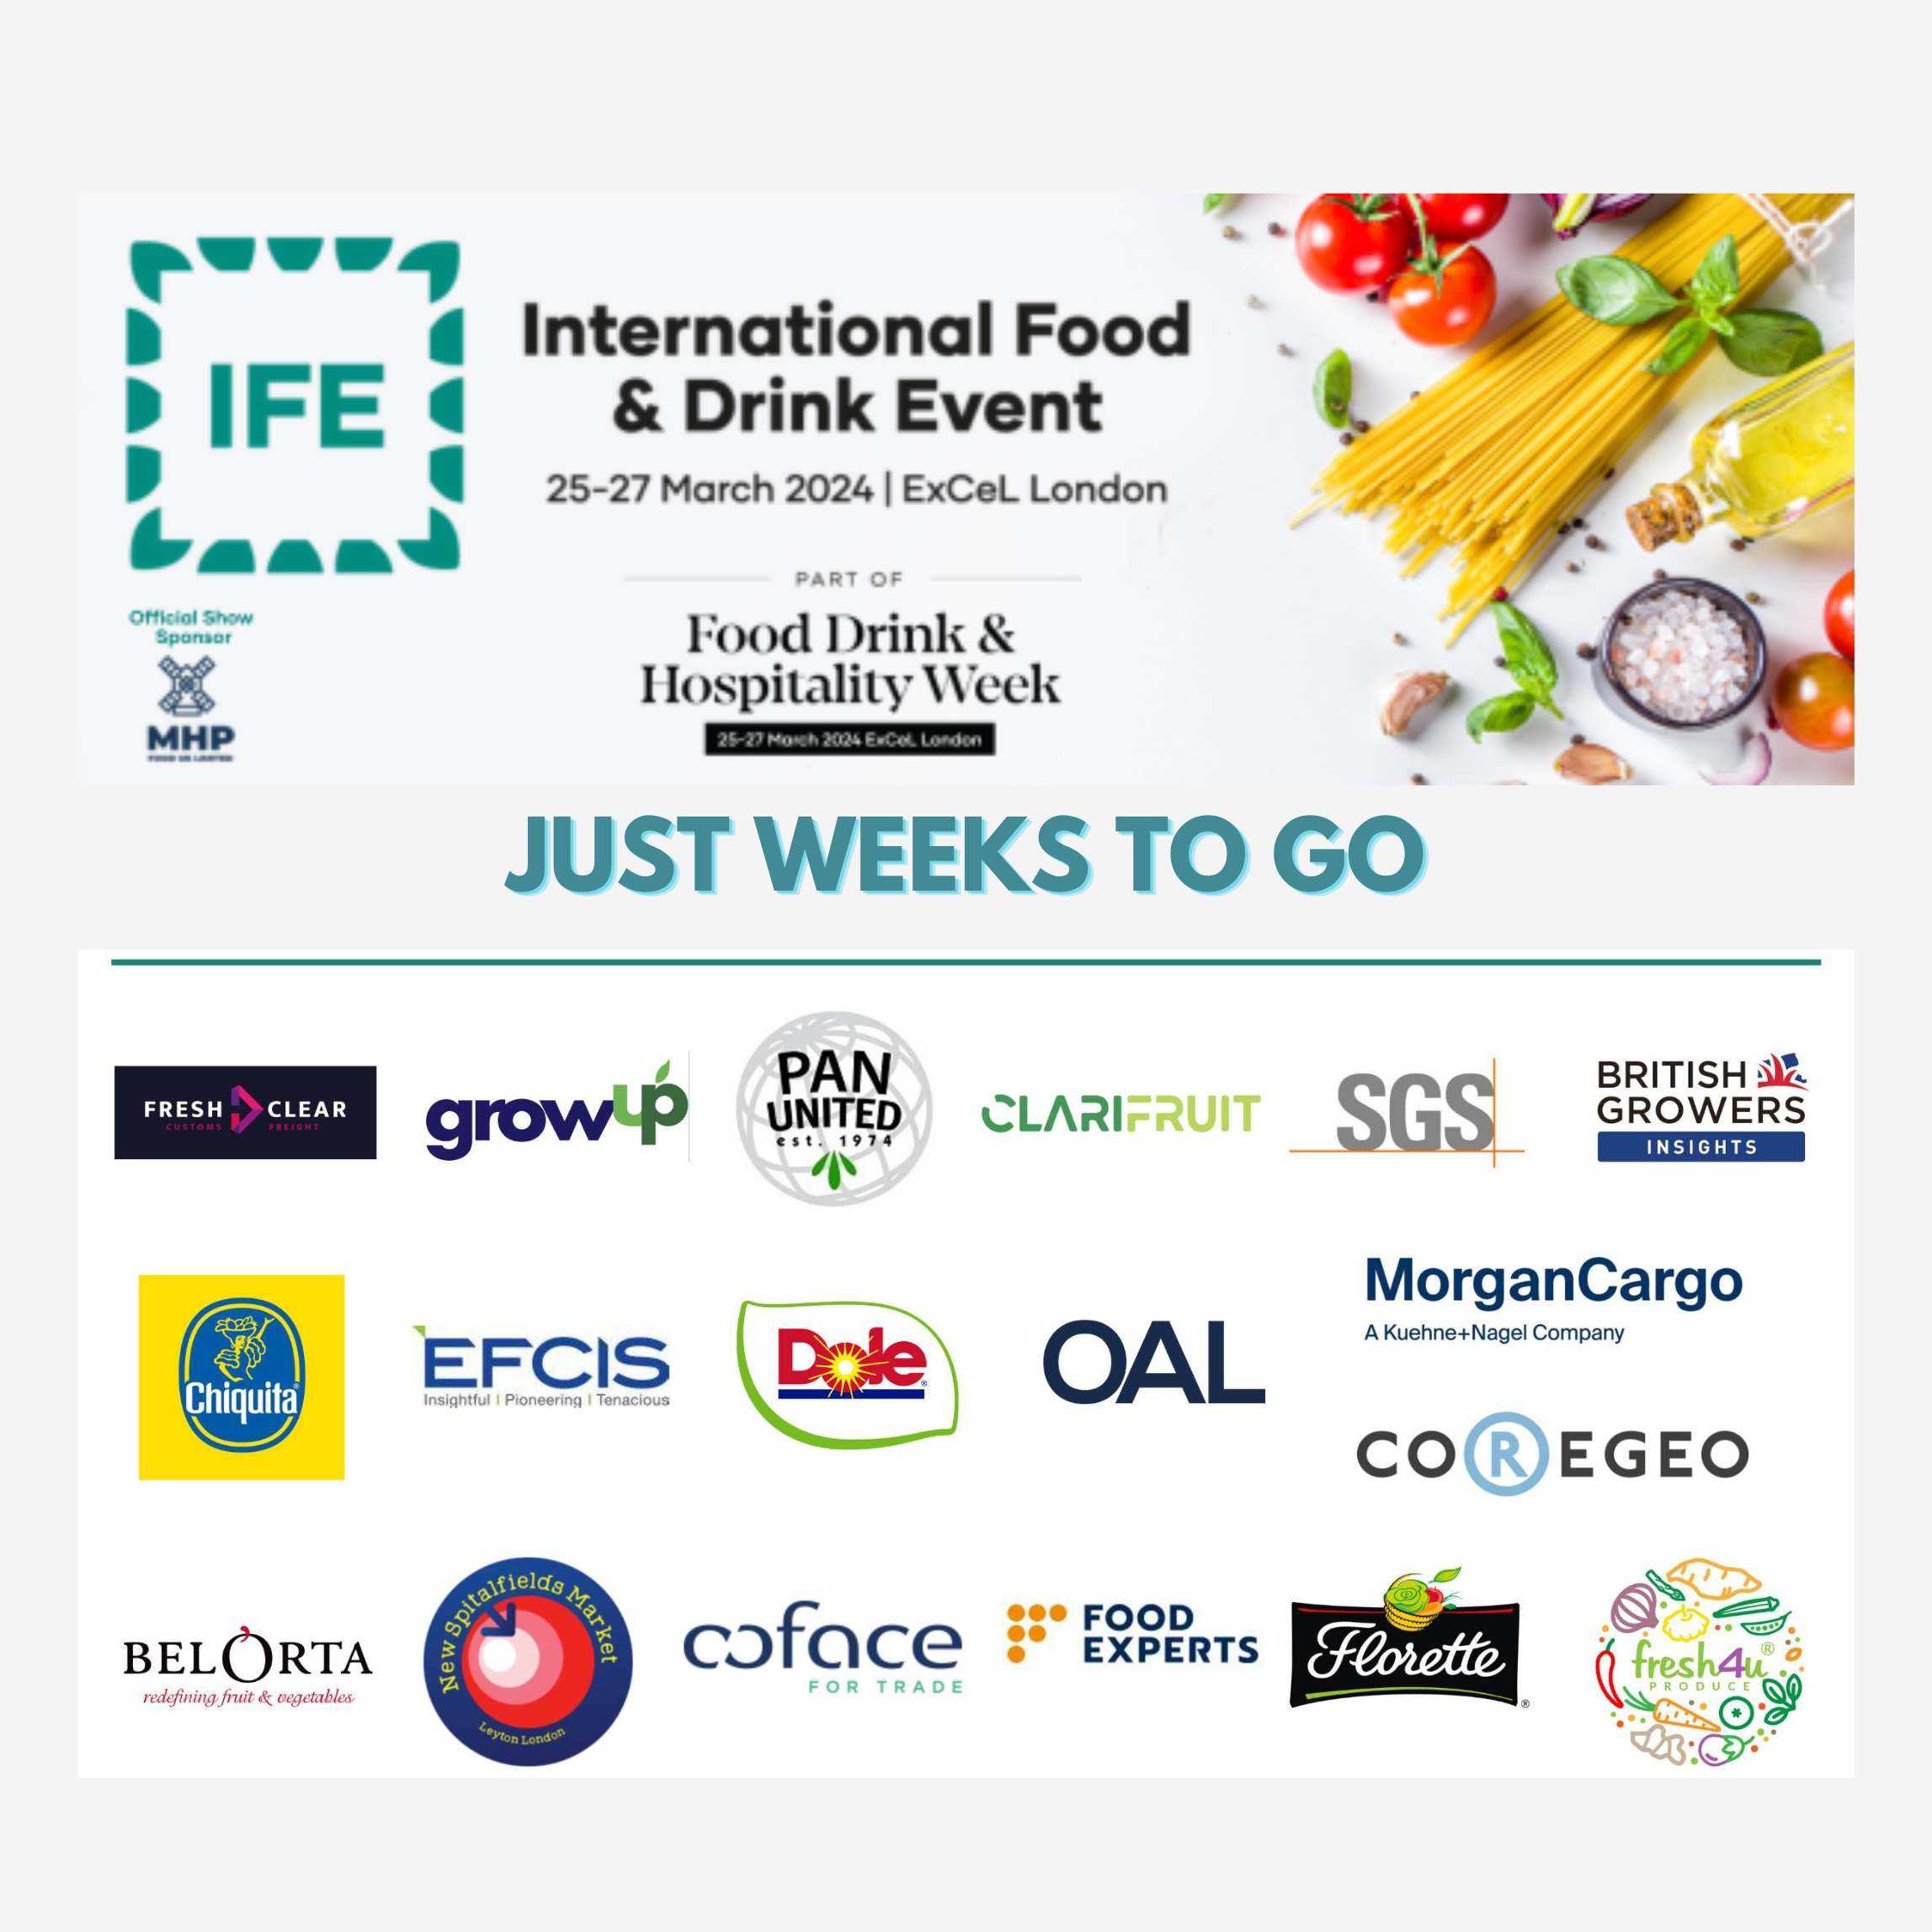 IFE INTERNATIONAL FOOD AND DRINK EVENT MARCH 25-27th 2024